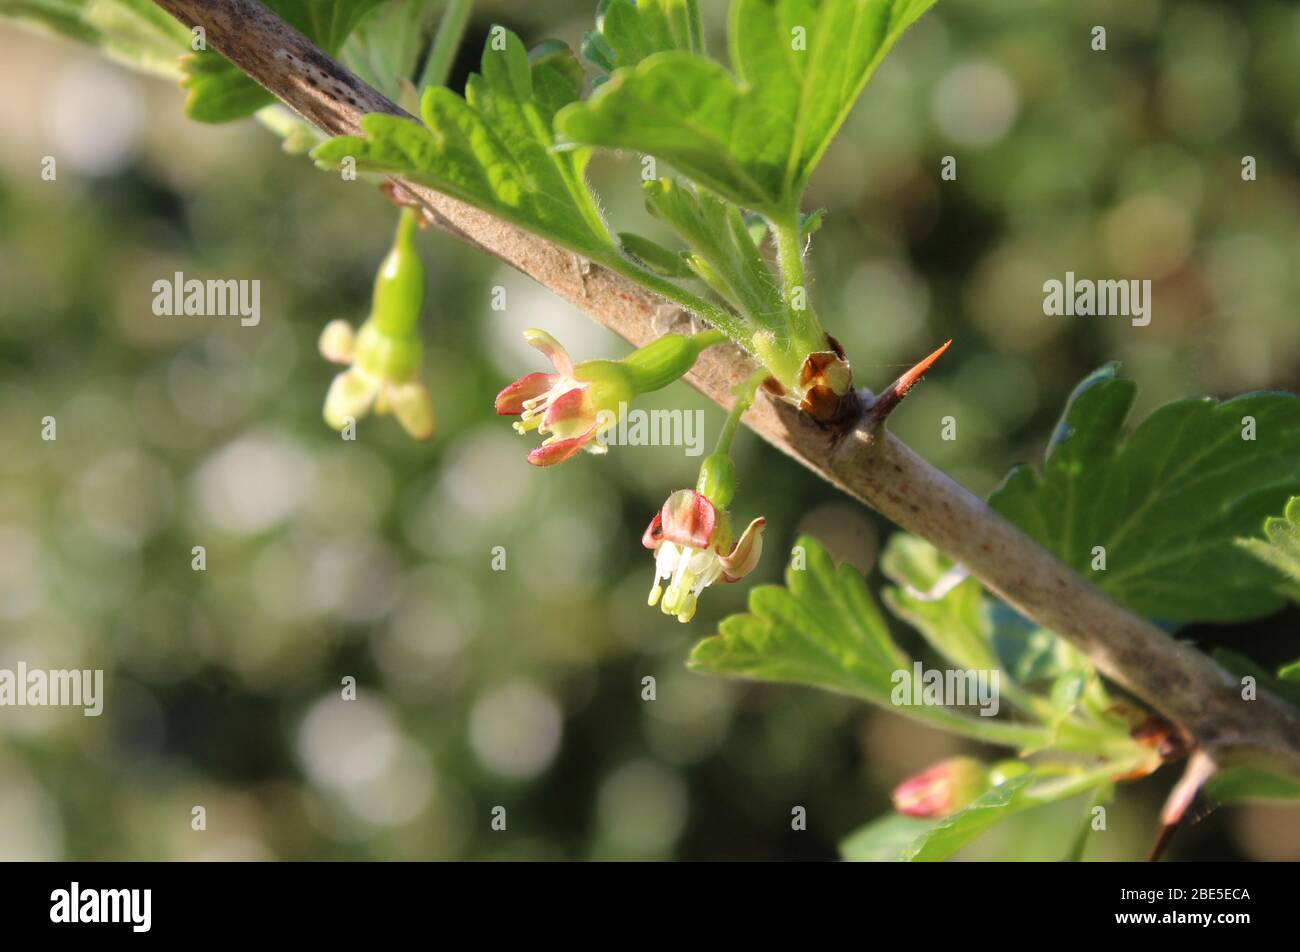 Close up image of the tiny pink flowers of the gooseberry plant, Ribes uva-crispa. Sunlit outdors, with copy space to the left. Stock Photo